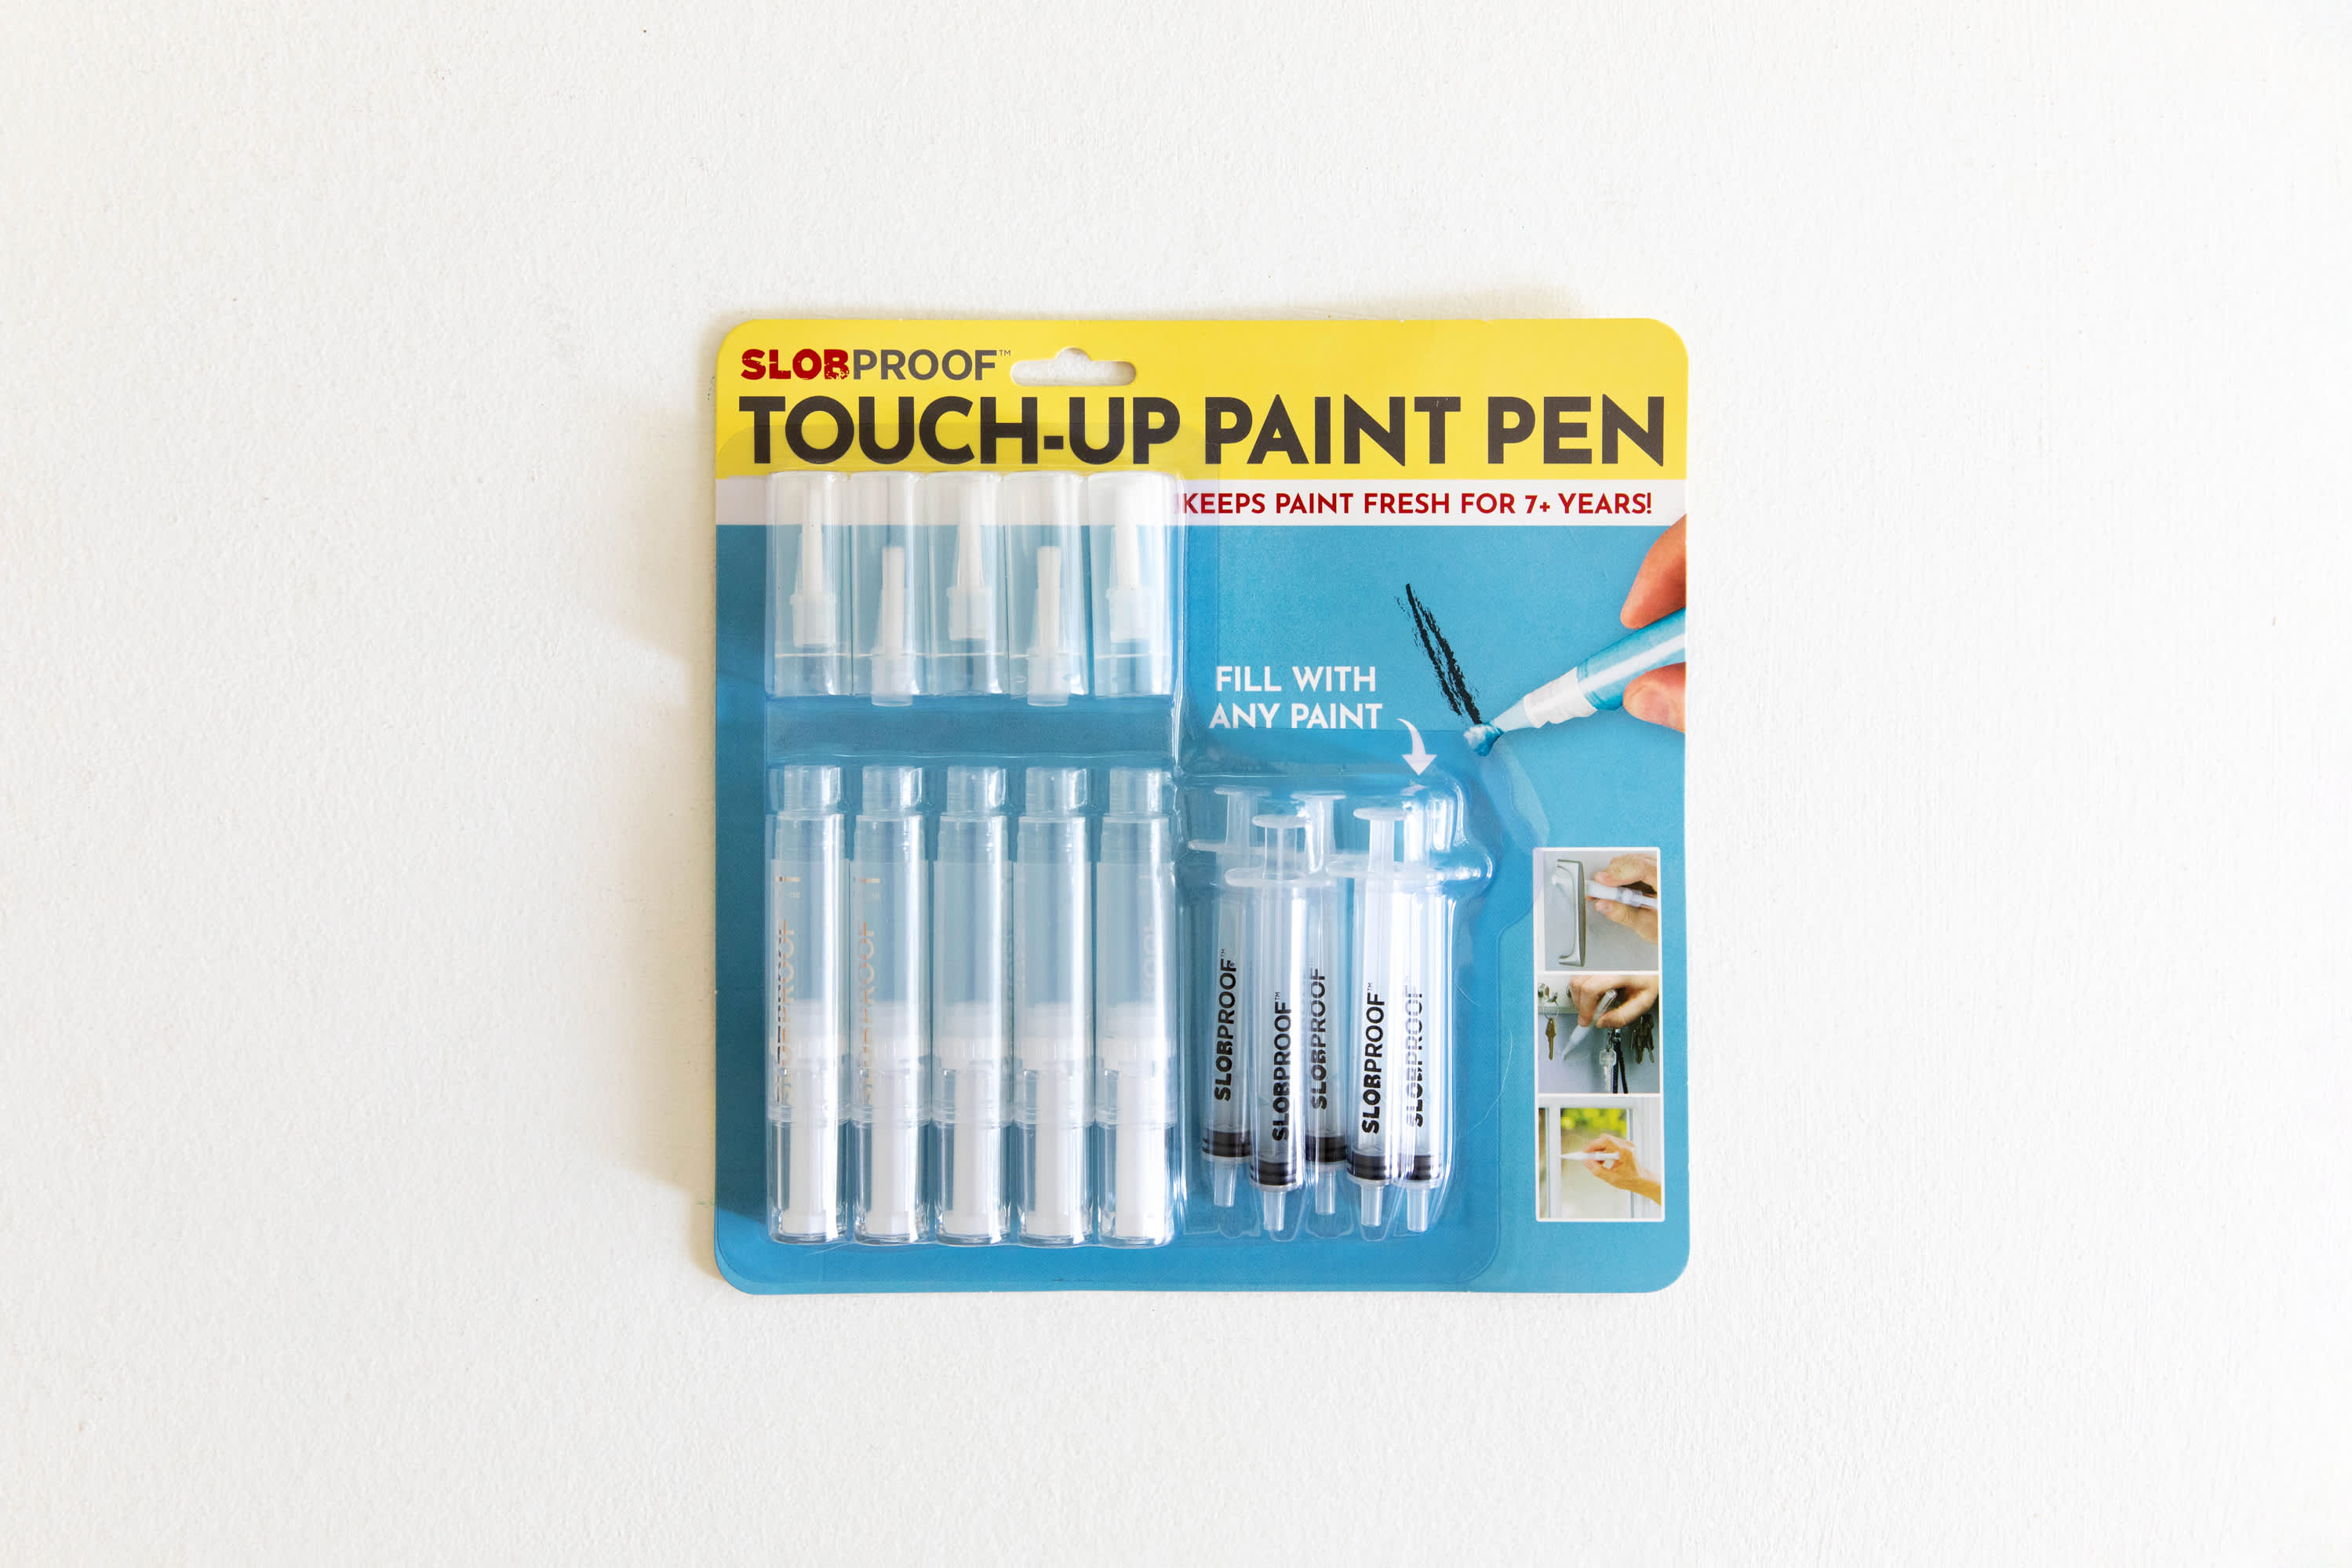 Slobproof Touch-up Paint Pen Review : Is It Worth It?